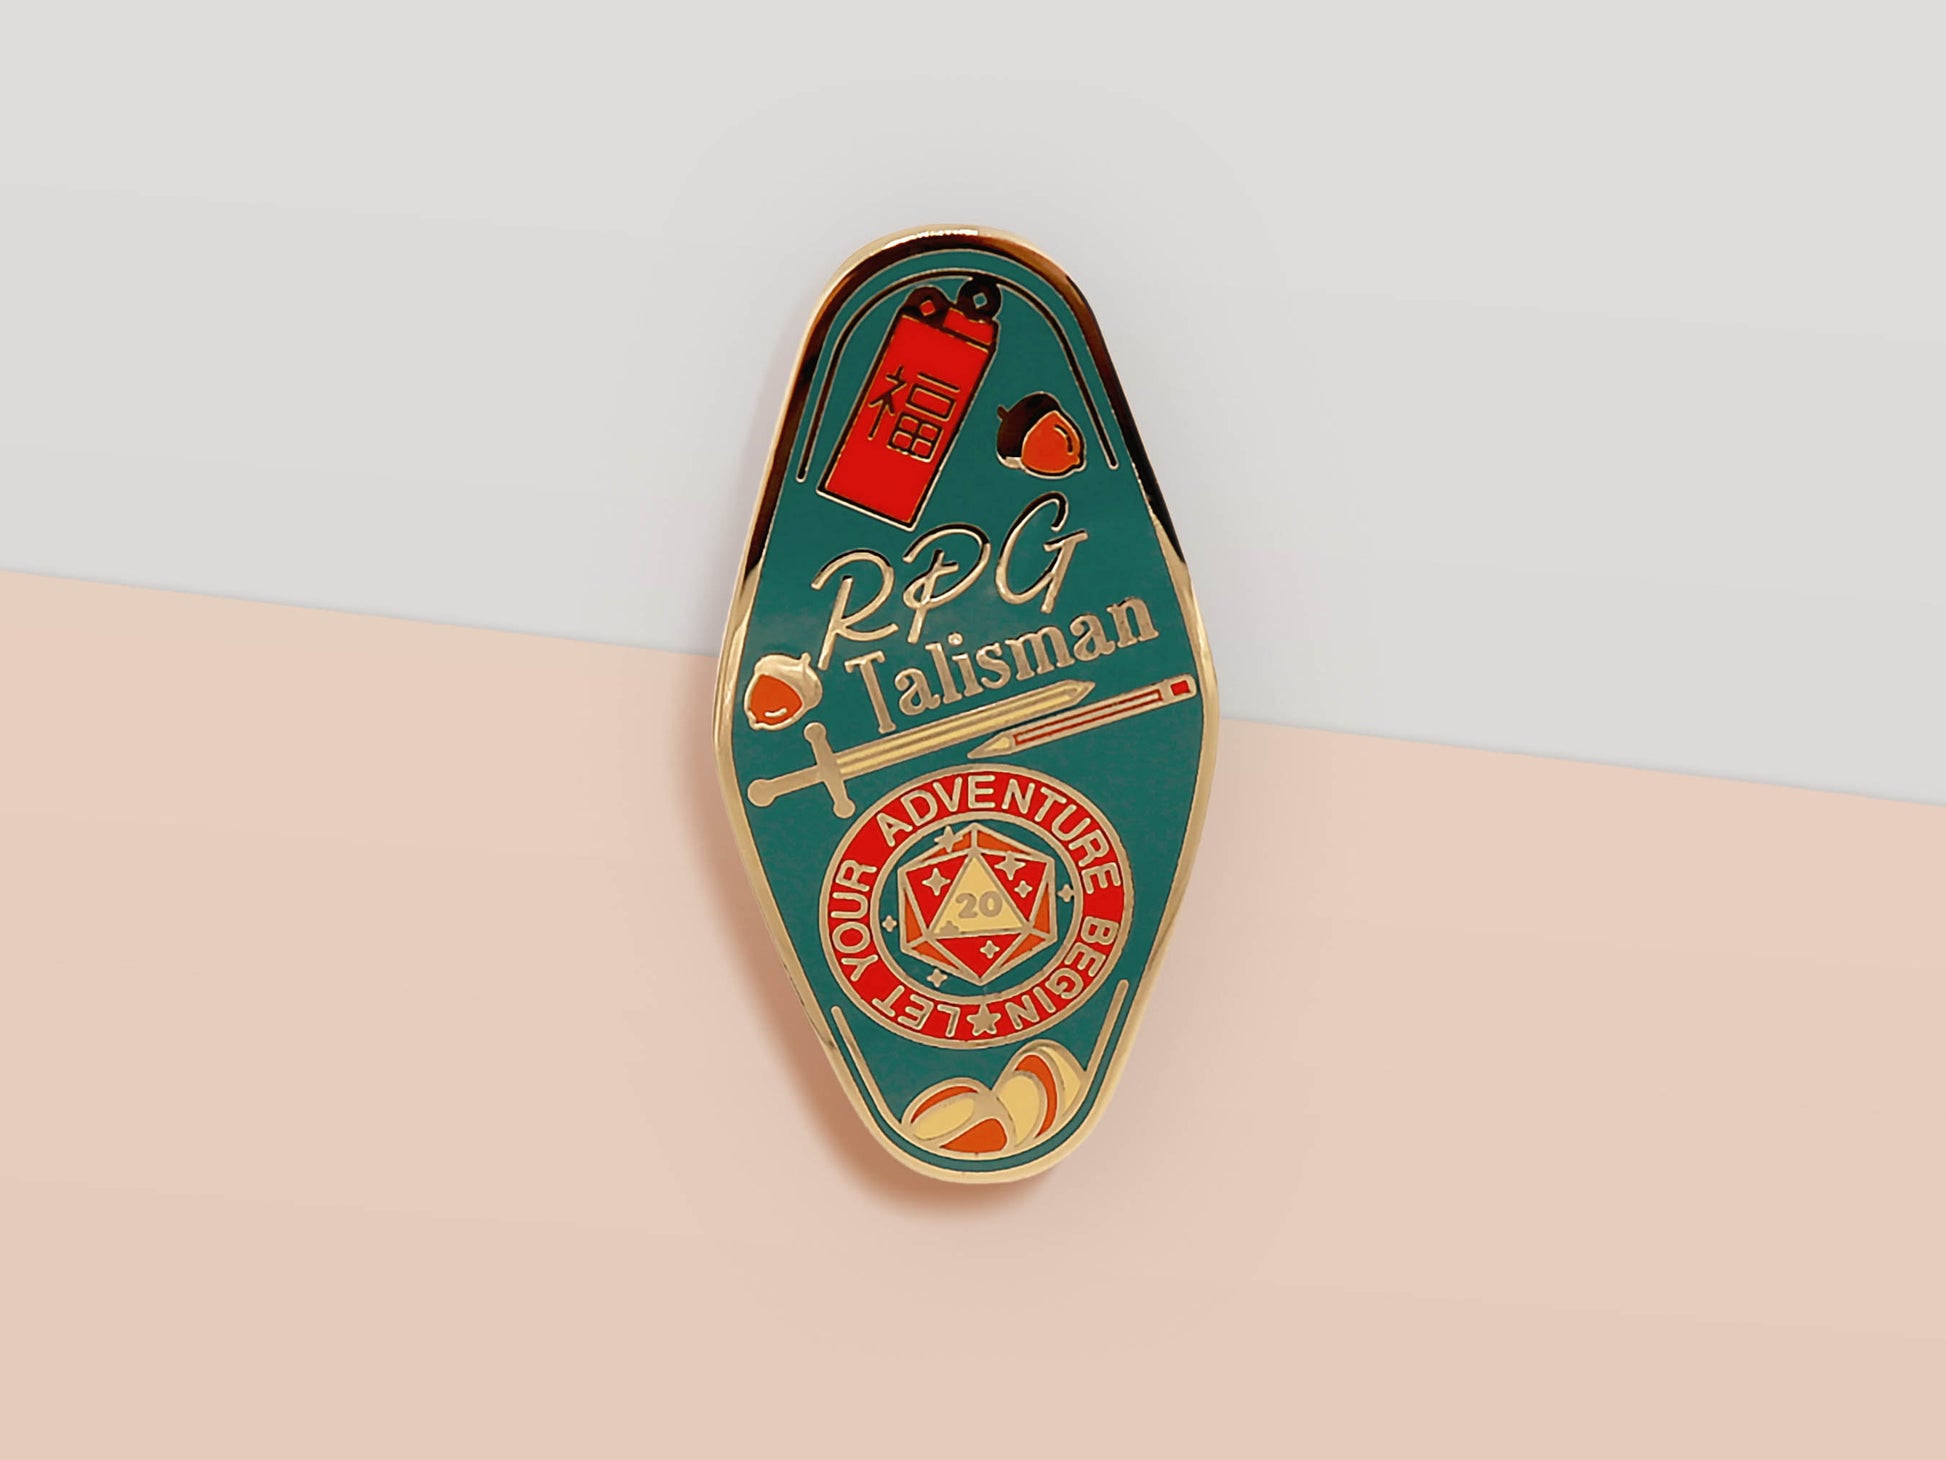 Gold Enamel Talisman Pin with red and blue design and the words RPG Talisman, Let Your Adventure Begin. The pins design includes a D20 dice and a sword and pencil, Hongbao red envelope, as well as acorns and crystals.